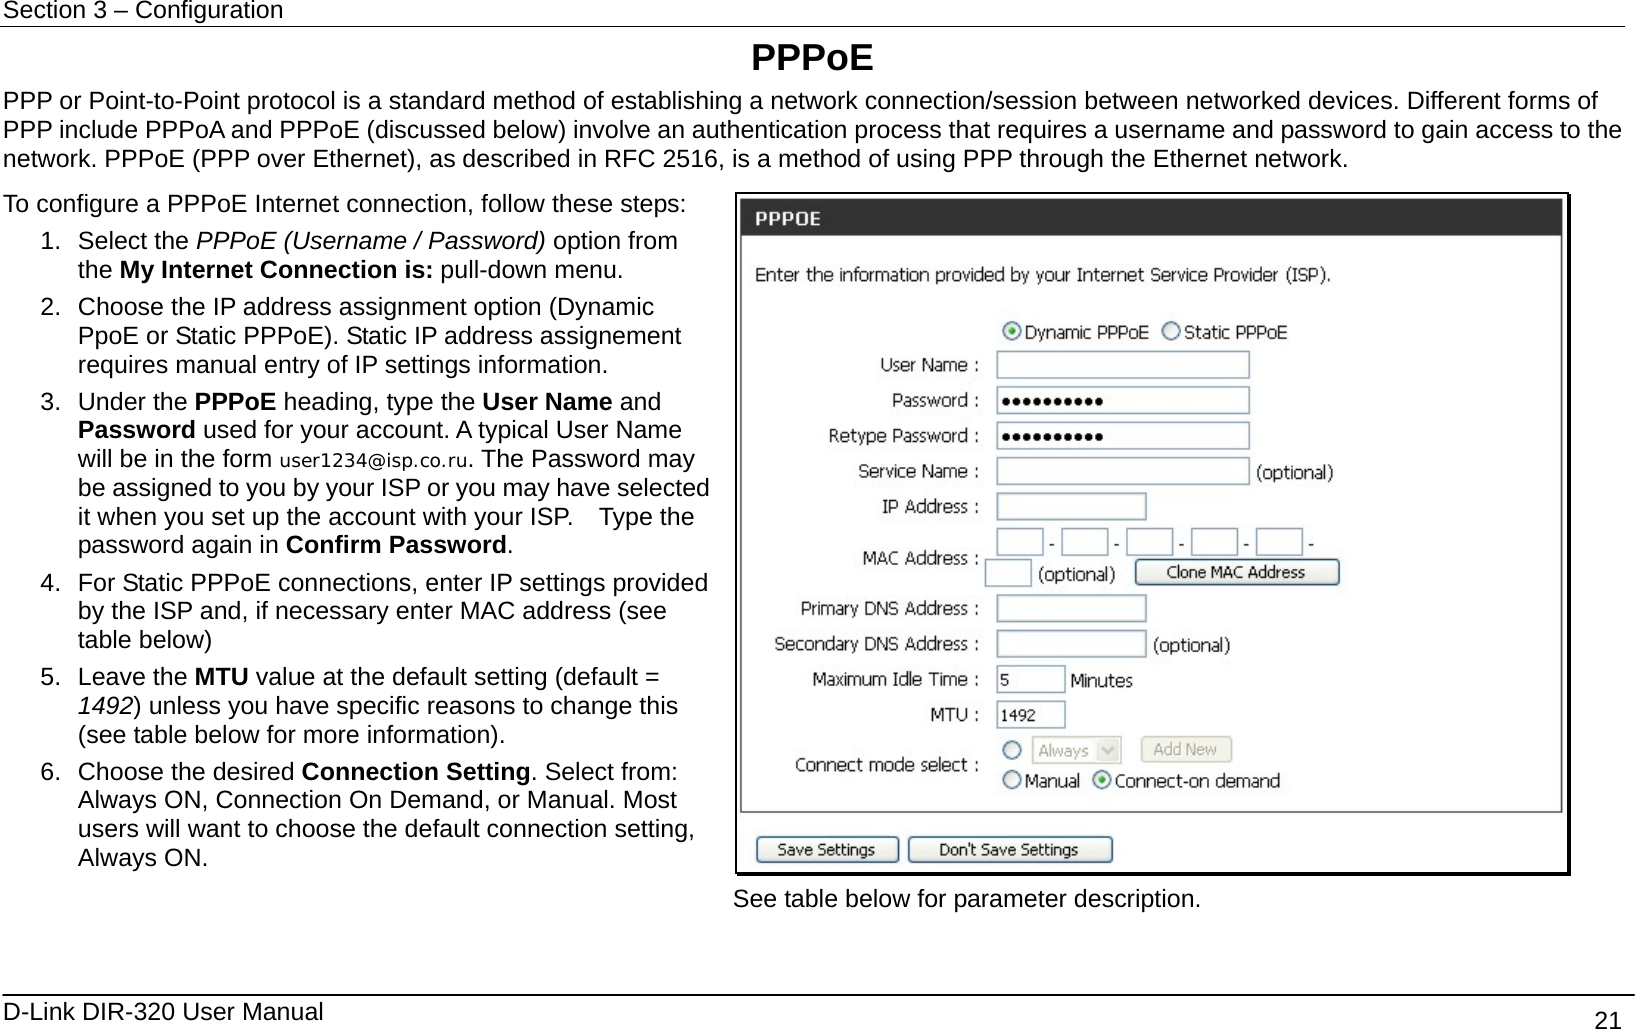 Section 3 – Configuration   D-Link DIR-320 User Manual                                       21 PPPoE PPP or Point-to-Point protocol is a standard method of establishing a network connection/session between networked devices. Different forms of PPP include PPPoA and PPPoE (discussed below) involve an authentication process that requires a username and password to gain access to the network. PPPoE (PPP over Ethernet), as described in RFC 2516, is a method of using PPP through the Ethernet network.   To configure a PPPoE Internet connection, follow these steps: 1. Select the PPPoE (Username / Password) option from the My Internet Connection is: pull-down menu. 2.  Choose the IP address assignment option (Dynamic PpoE or Static PPPoE). Static IP address assignement requires manual entry of IP settings information. 3. Under the PPPoE heading, type the User Name and Password used for your account. A typical User Name will be in the form user1234@isp.co.ru. The Password may be assigned to you by your ISP or you may have selected it when you set up the account with your ISP.    Type the password again in Confirm Password. 4.  For Static PPPoE connections, enter IP settings provided by the ISP and, if necessary enter MAC address (see table below) 5. Leave the MTU value at the default setting (default = 1492) unless you have specific reasons to change this (see table below for more information). 6.  Choose the desired Connection Setting. Select from: Always ON, Connection On Demand, or Manual. Most users will want to choose the default connection setting, Always ON.   See table below for parameter description.  